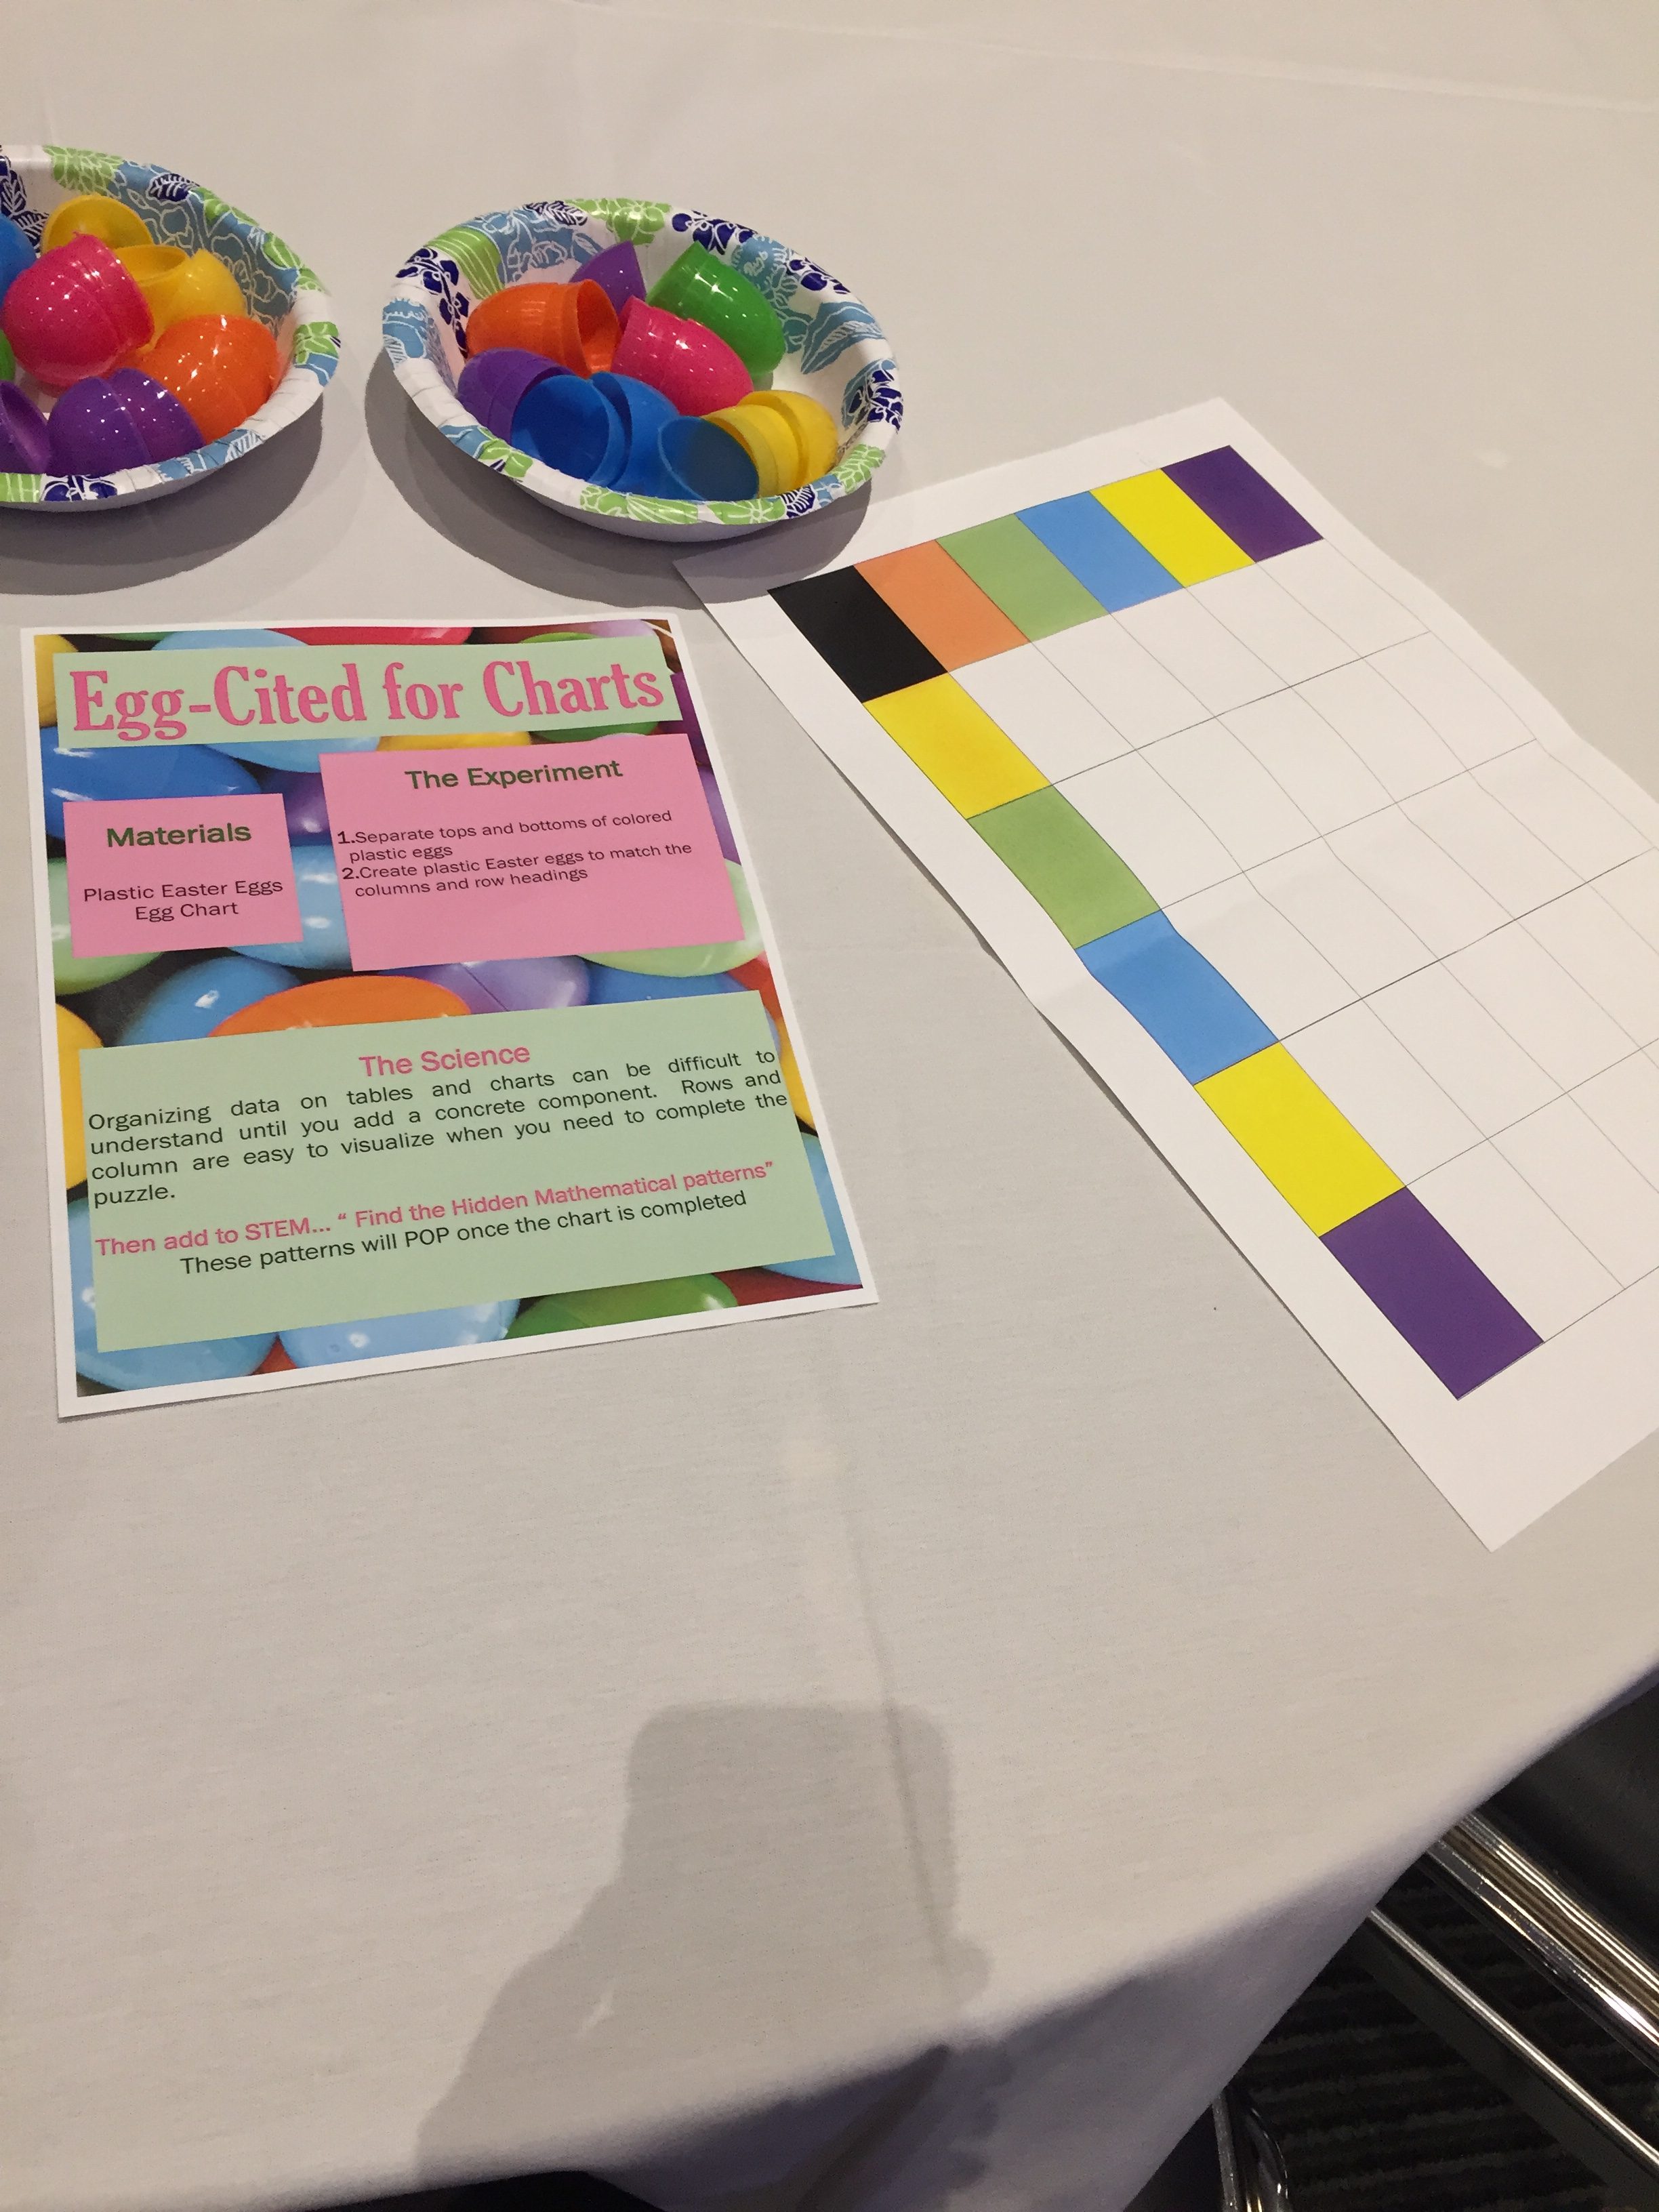 An activity to learn about making and using charts--a page with colored blocks on the x and y axes and plastic eggs to match with those colors.